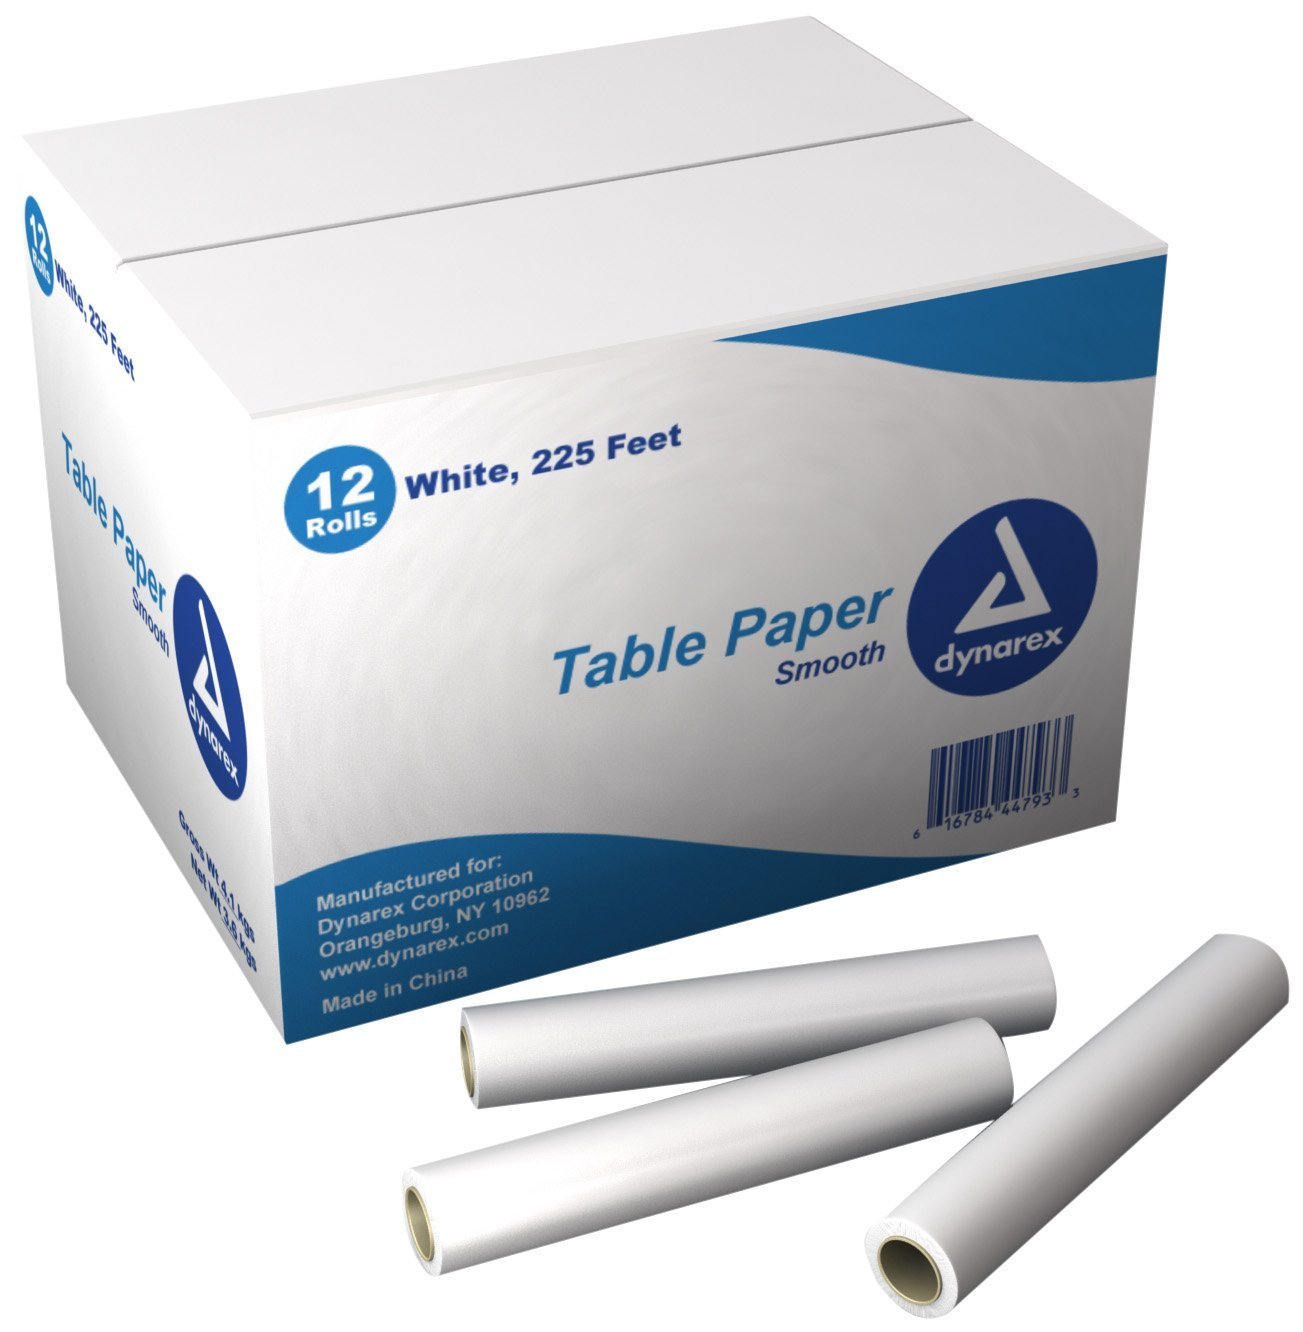  Exam Table Paper21 X 225 Paper Table Cover, 12 Rolls Of  Medical Exam Table Paper, Ideal For Doctors Offices, Medical Facilities,  Patternmaking, Tracing And More